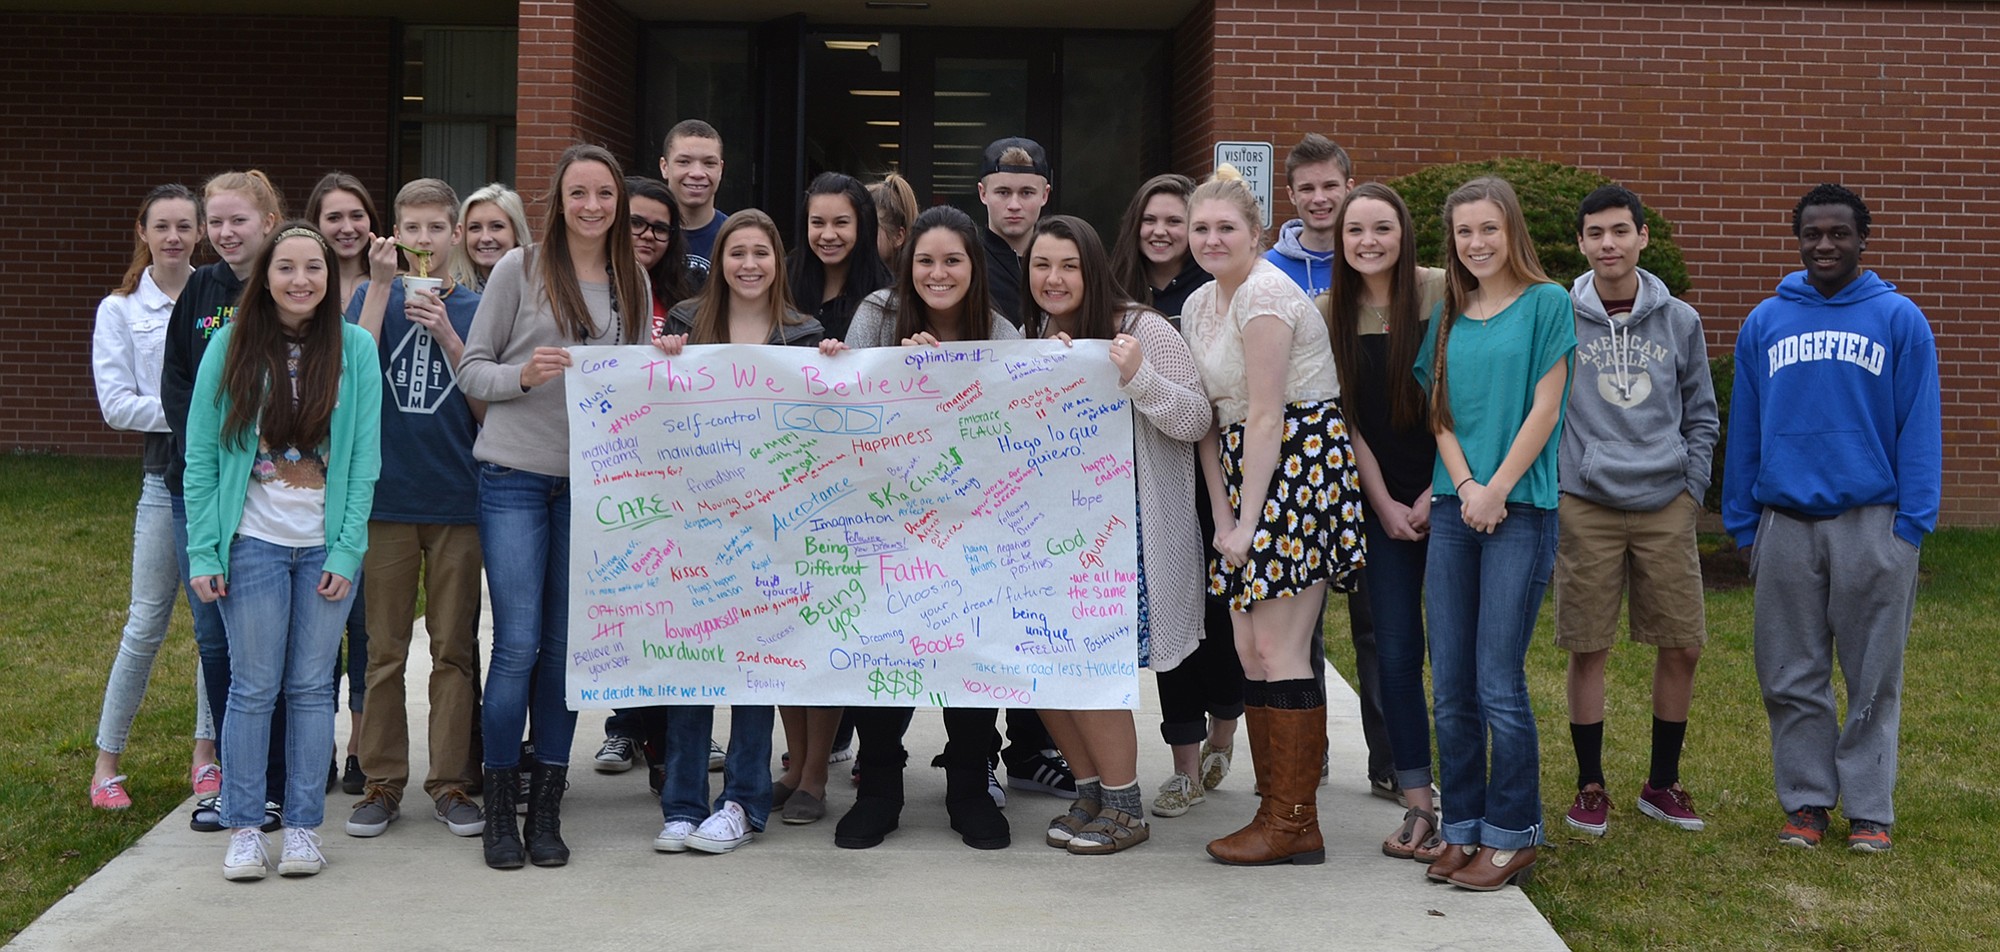 Ridgefield: Ridgefield High School language arts students wrote essays on the American Dream, taking key words and phrases from each others' essays and putting them on large poster boards, which illustration students used as inspiration to create works of art.